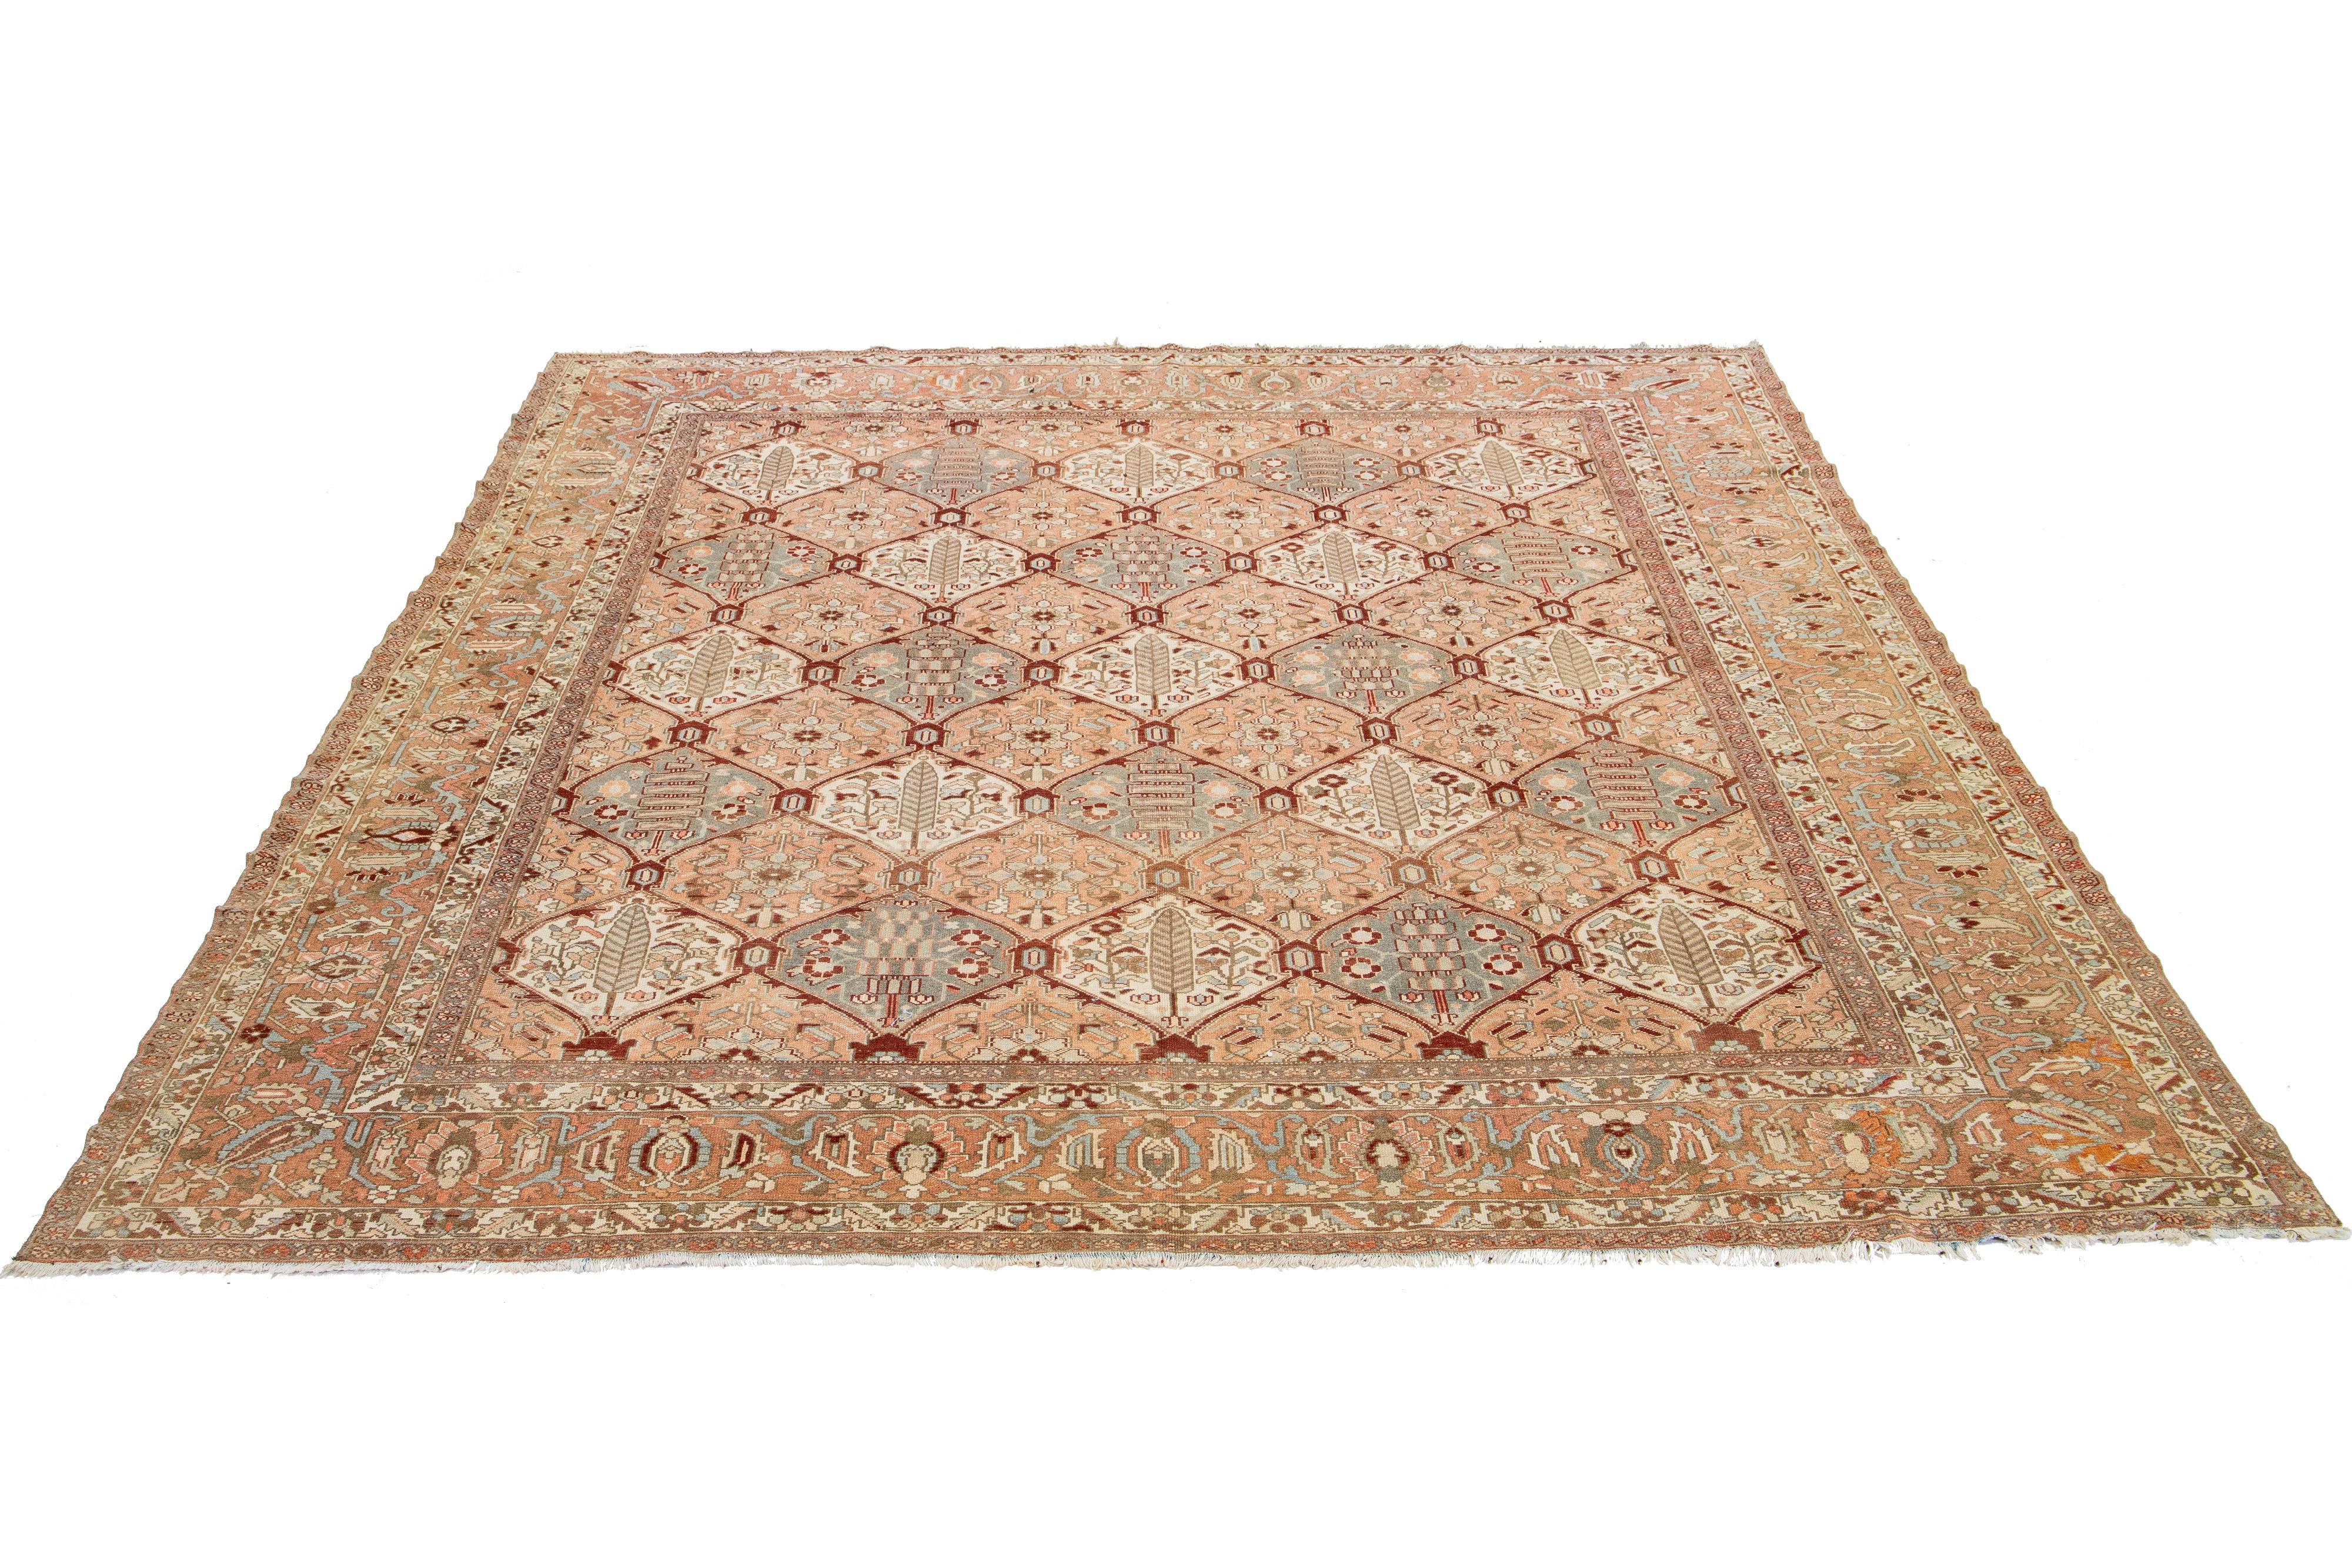 Beautiful Antique Bakhtiari hand-knotted wool rug featuring a peach-colored field. This exquisite Persian rug showcases a classic geometric floral design with blue, beige, red-rust, and gray hues.

This rug measures 12'4